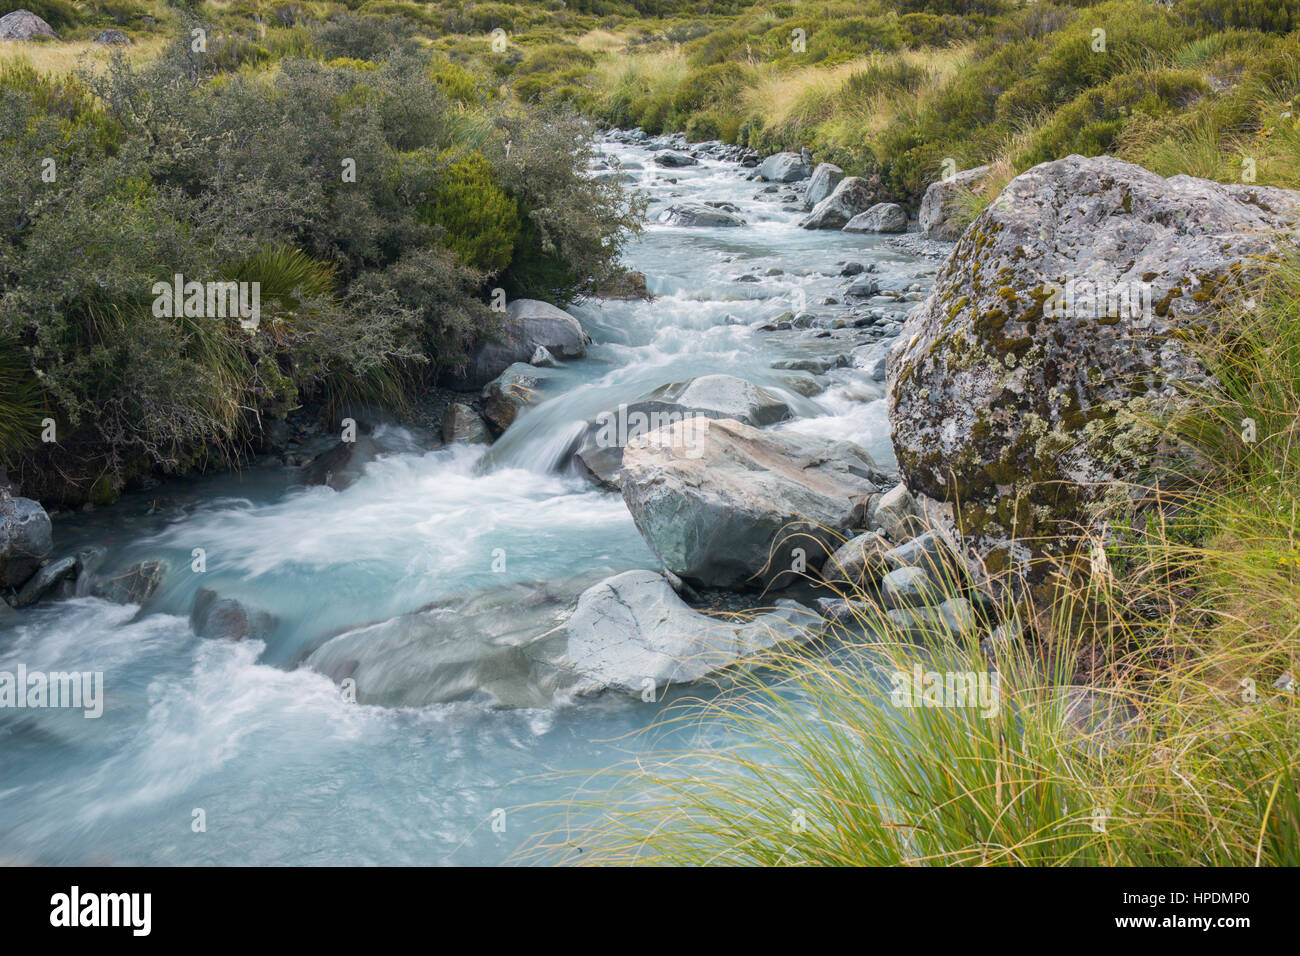 Aoraki/Mount Cook National Park, Canterbury, New Zealand. Mountain stream fed by snowmelt in the Hooker Valley. Stock Photo